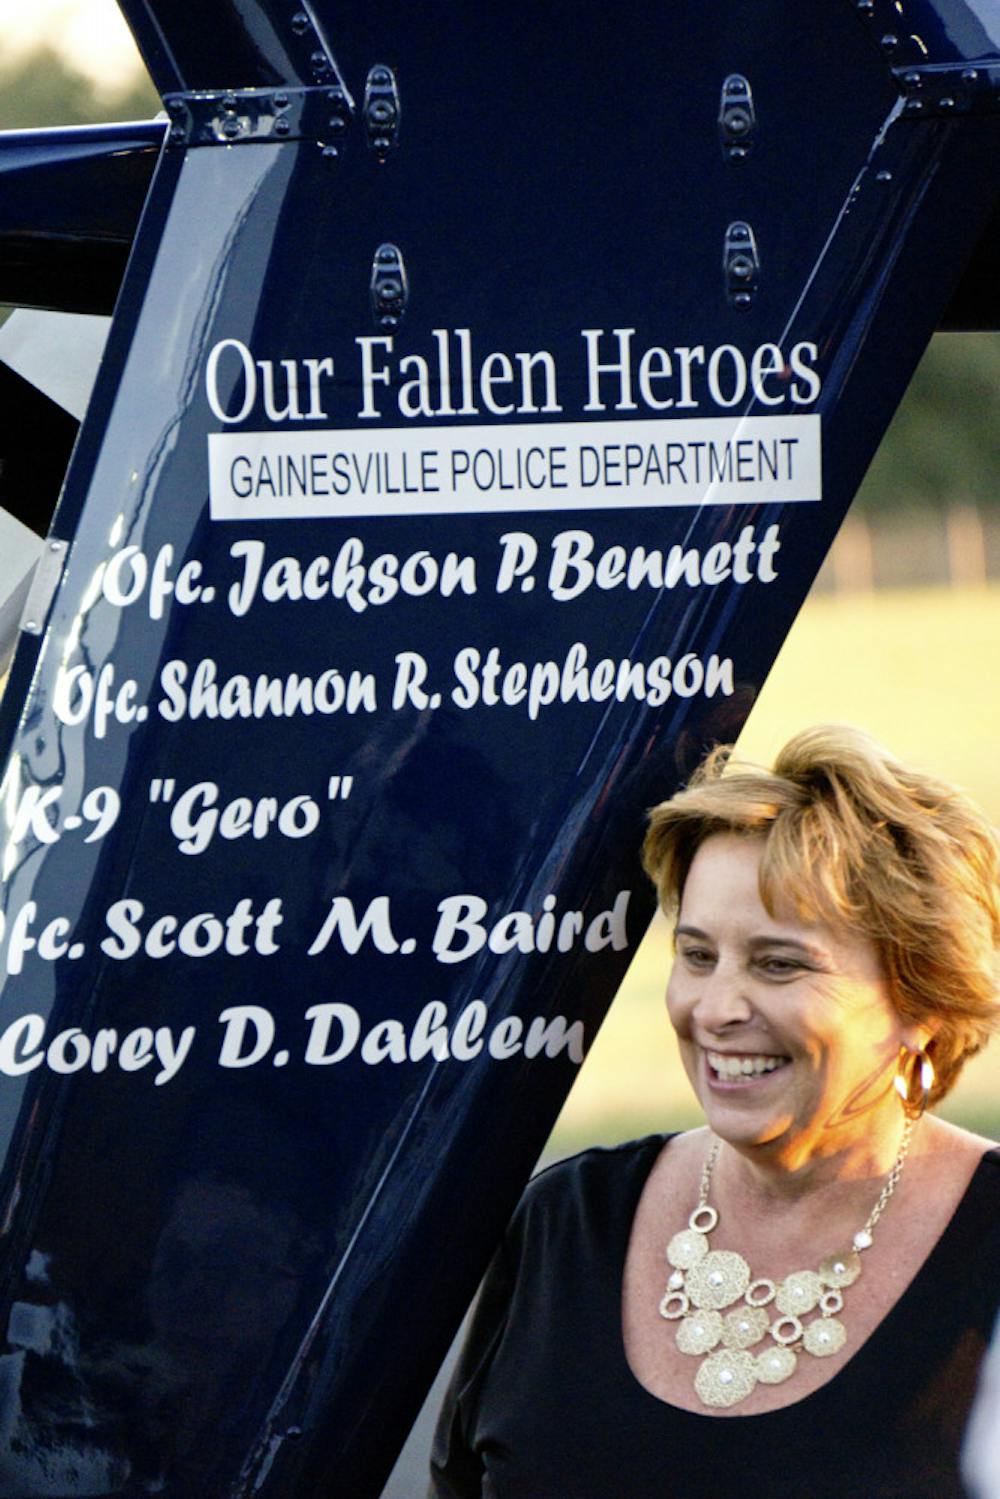 <p>Sally Dahlem, widow of Lt. Corey Dahlem, stands next to a helicopter that was repainted to memorialize her husband and other fallen police officers. “I think it’s beautiful,” she said. “It was a wonderful surprise.”</p>